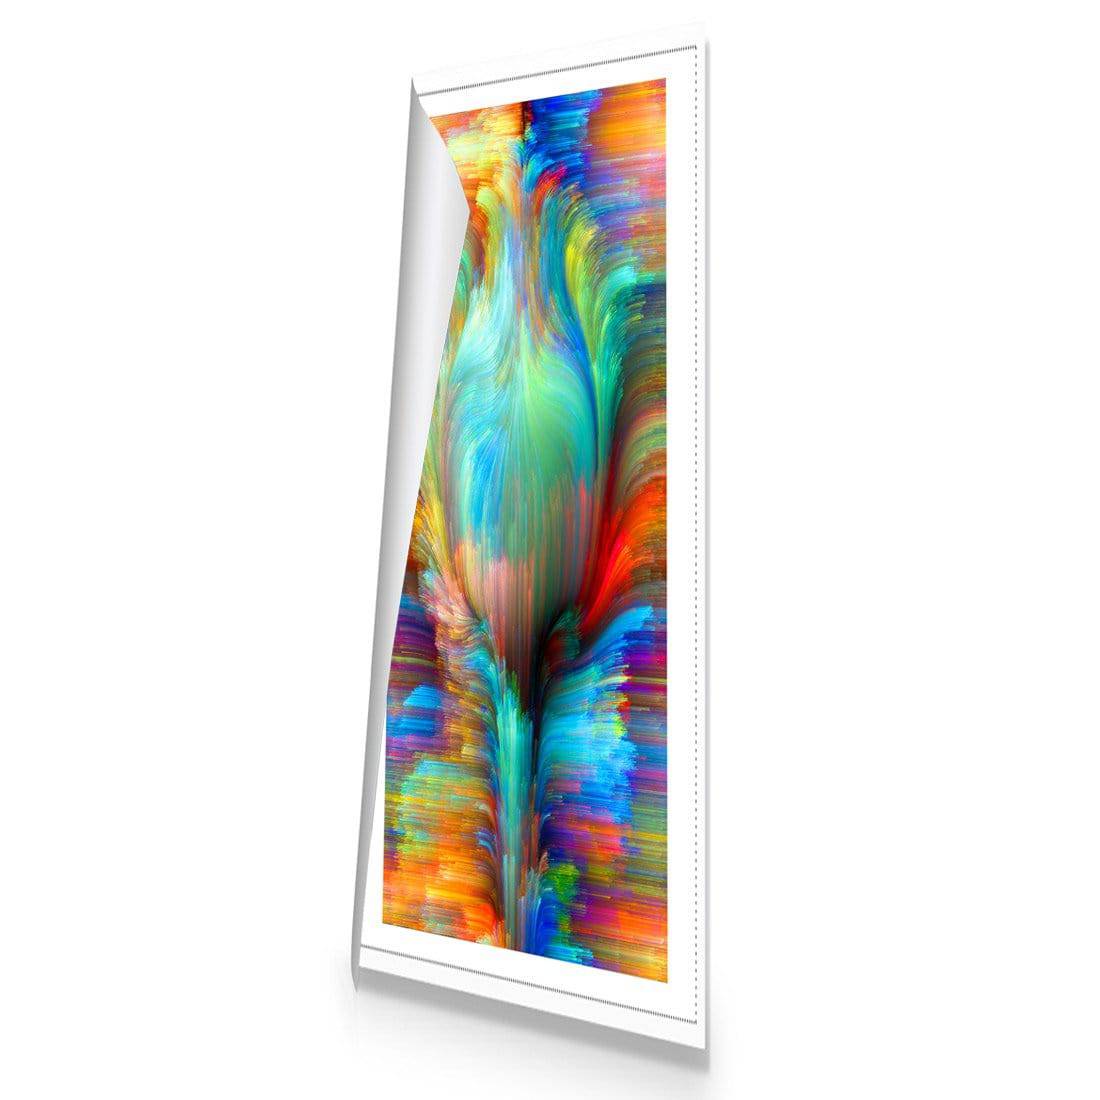 Fuzz Sprouting Canvas Art-Canvas-Wall Art Designs-60x20cm-Rolled Canvas-Wall Art Designs